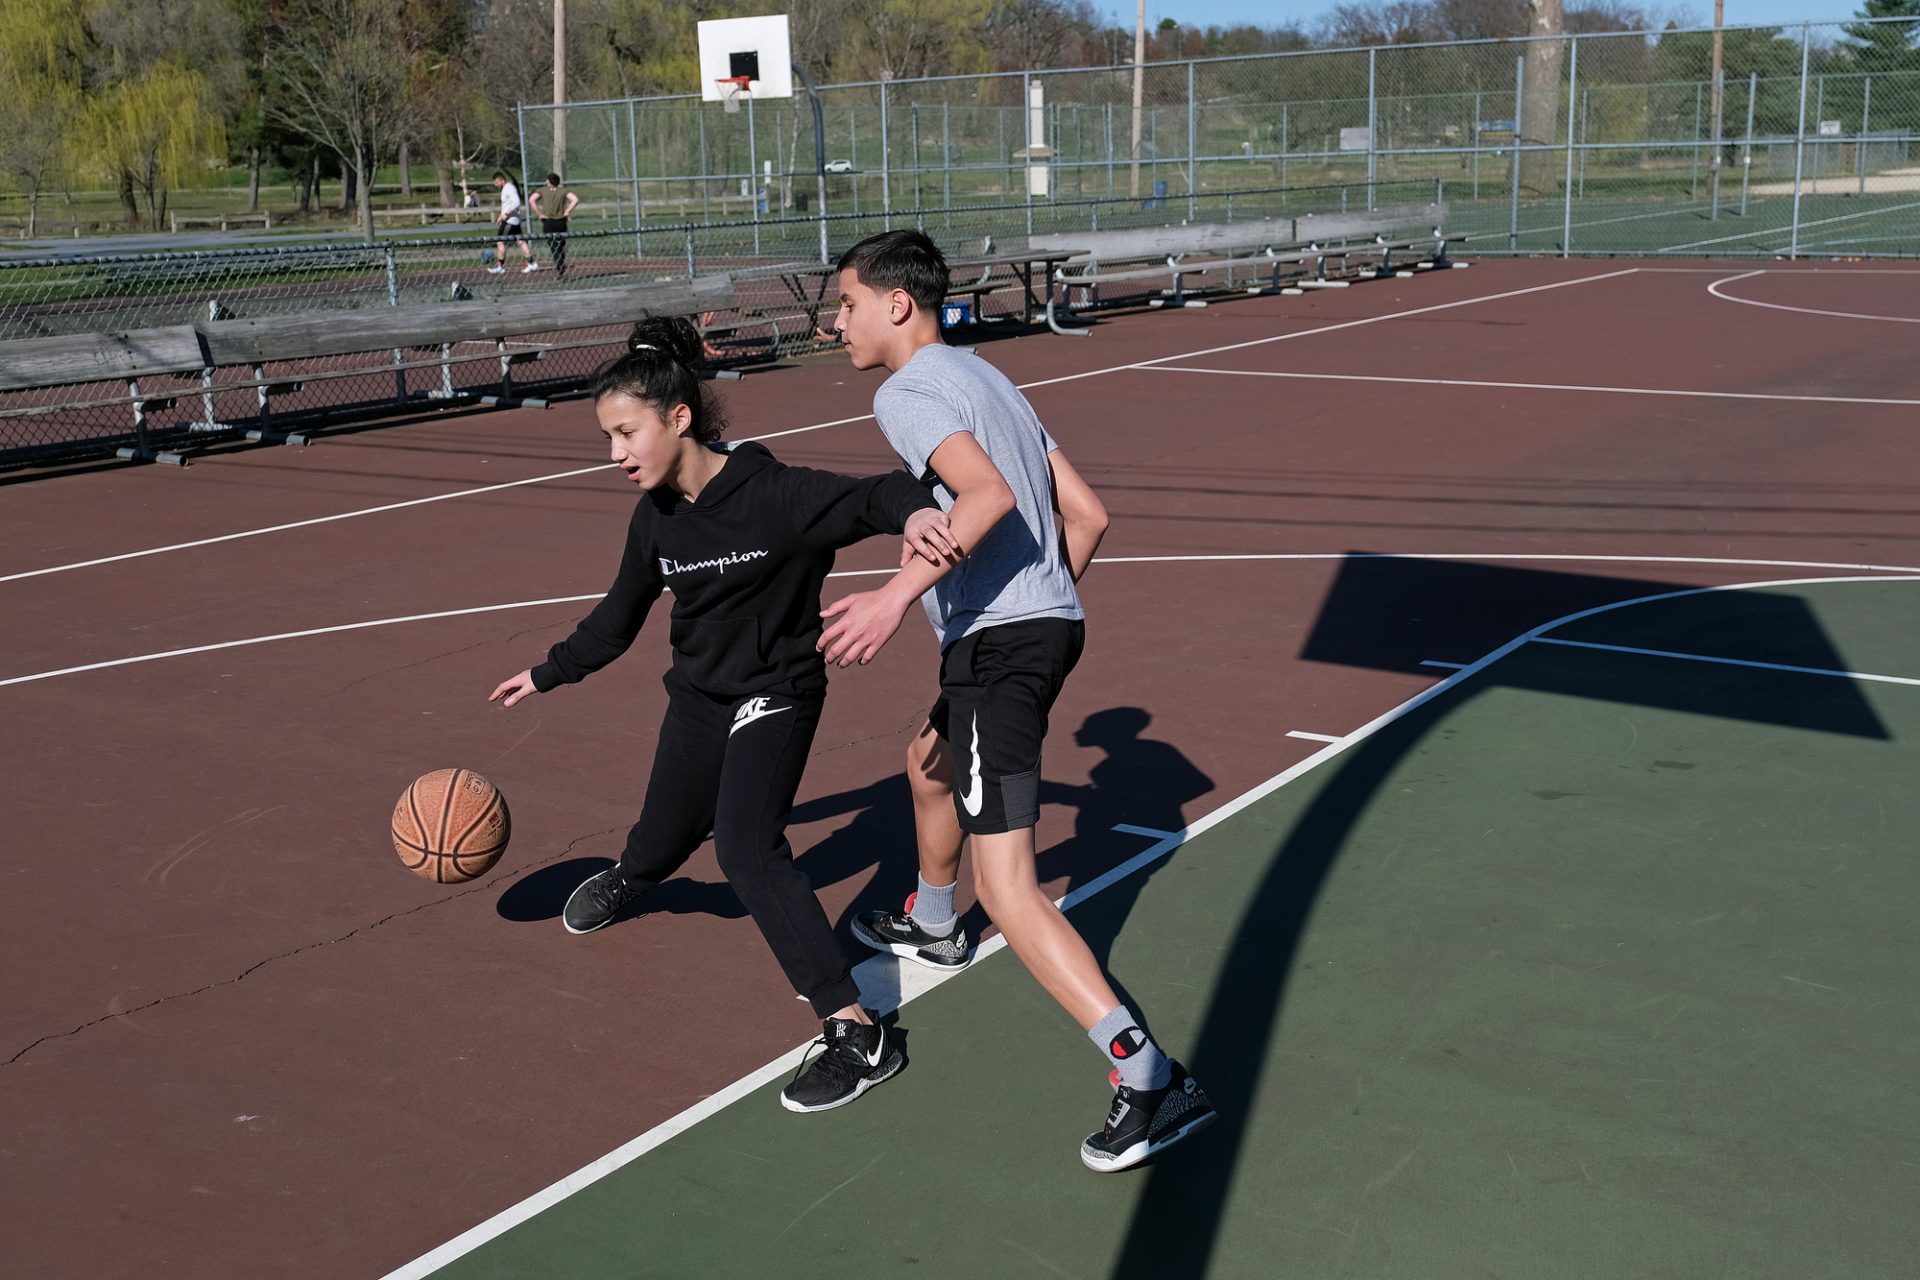 Jessenia Almonte, left, of Allentown, and Gabby Ball, right, of Allentown, play basketball Mar. 21, 2020, at Cedar Beach Park in Allentown, Pennsylvania. Both are staying home as schools are closed, but they enjoy playing basketball and still want to come out to play.